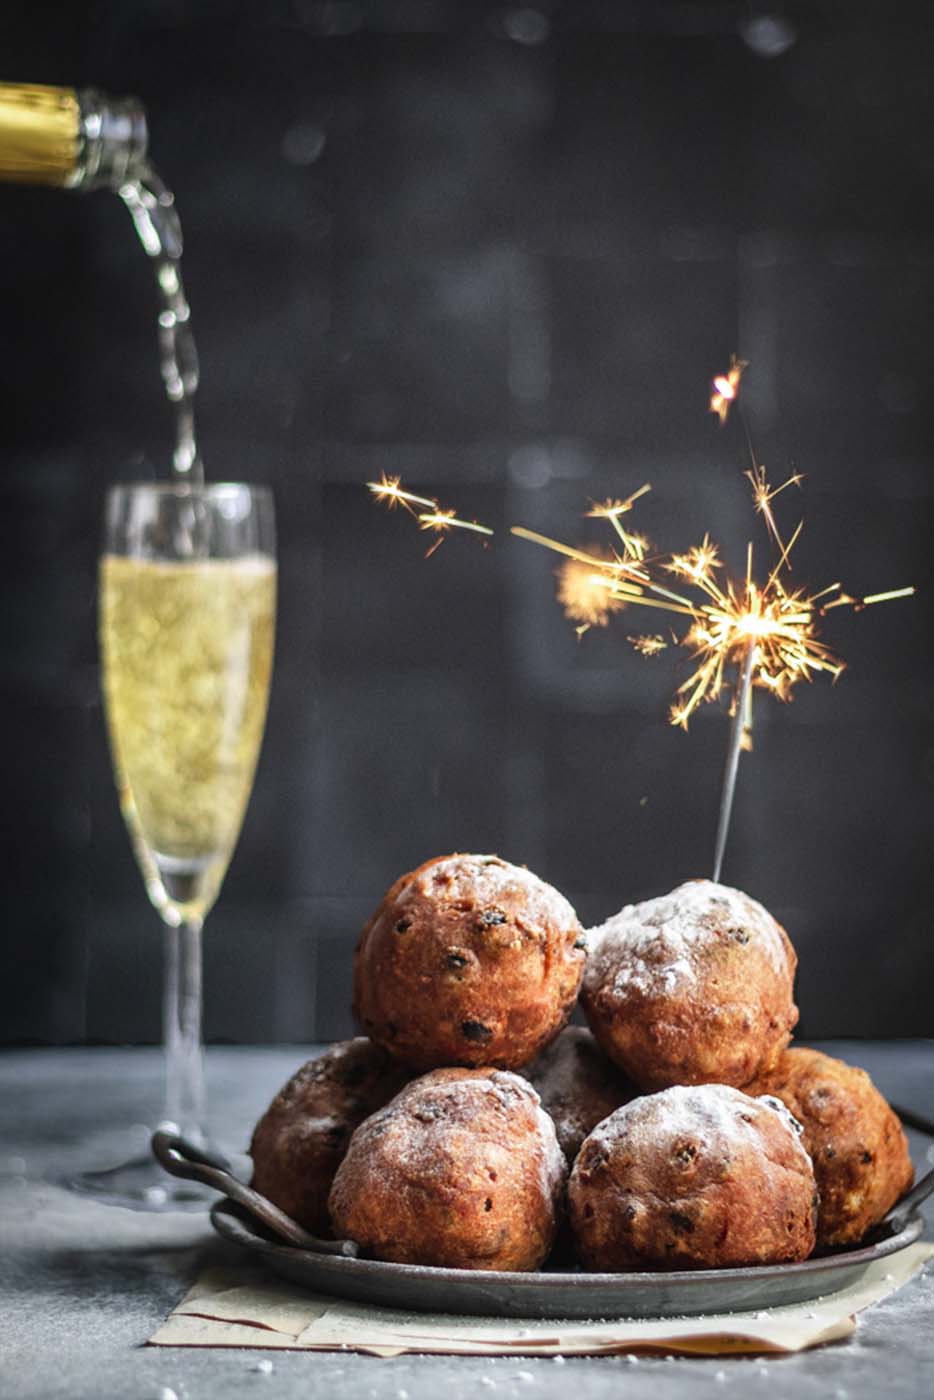 Oliebollen – Traditional Dutch Doughnuts with beer